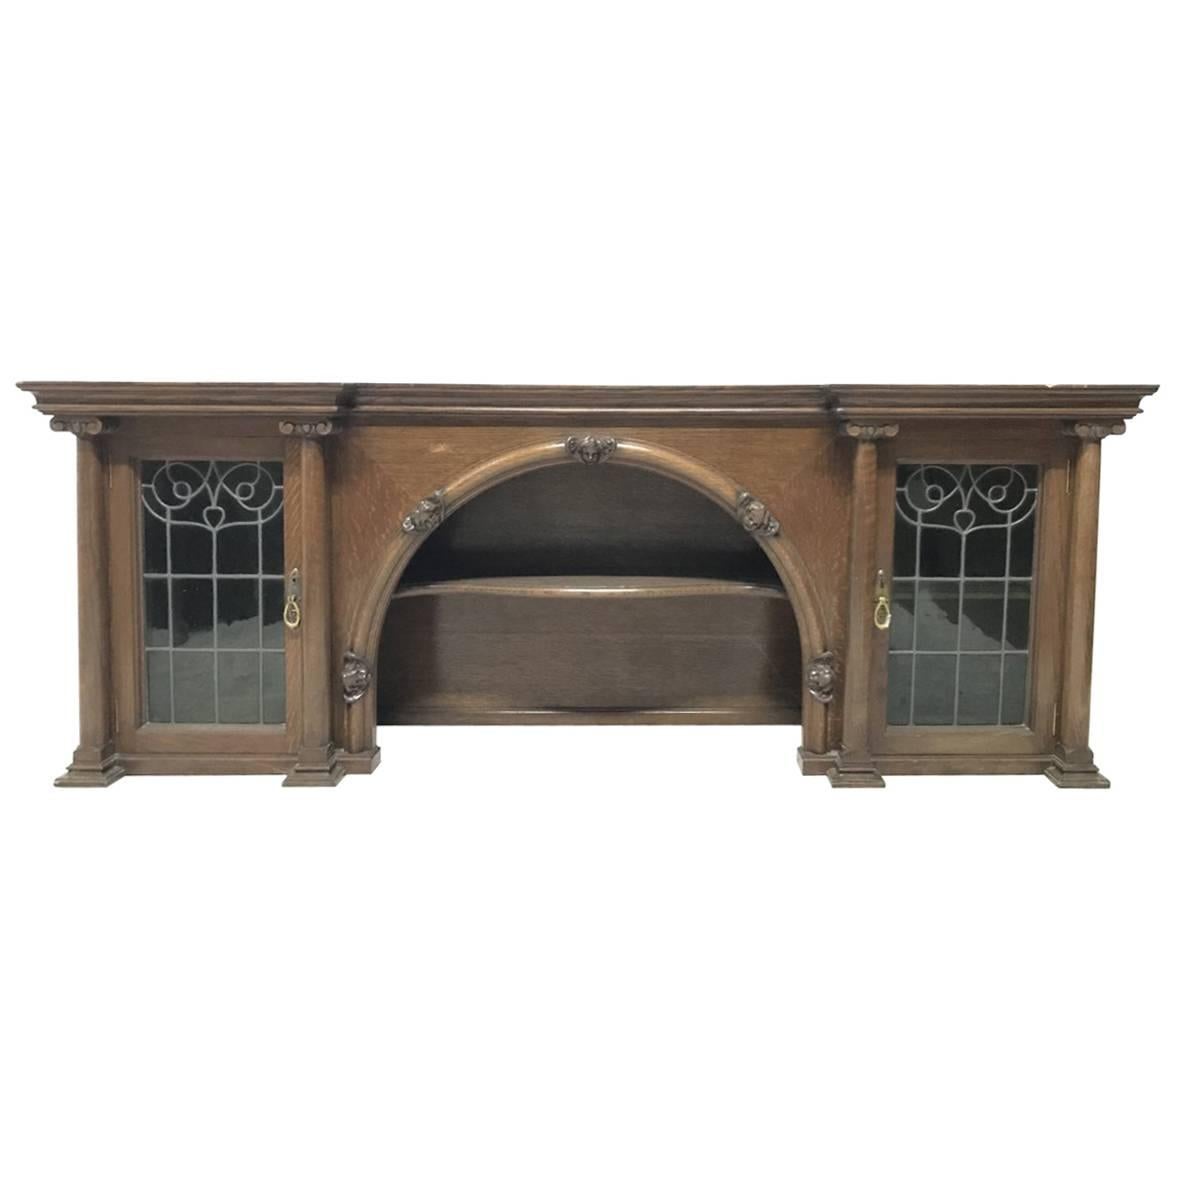 John Ednie Arts & Crafts Glasgow Oak over Mantle, Carved Cherubs and Stain Glass